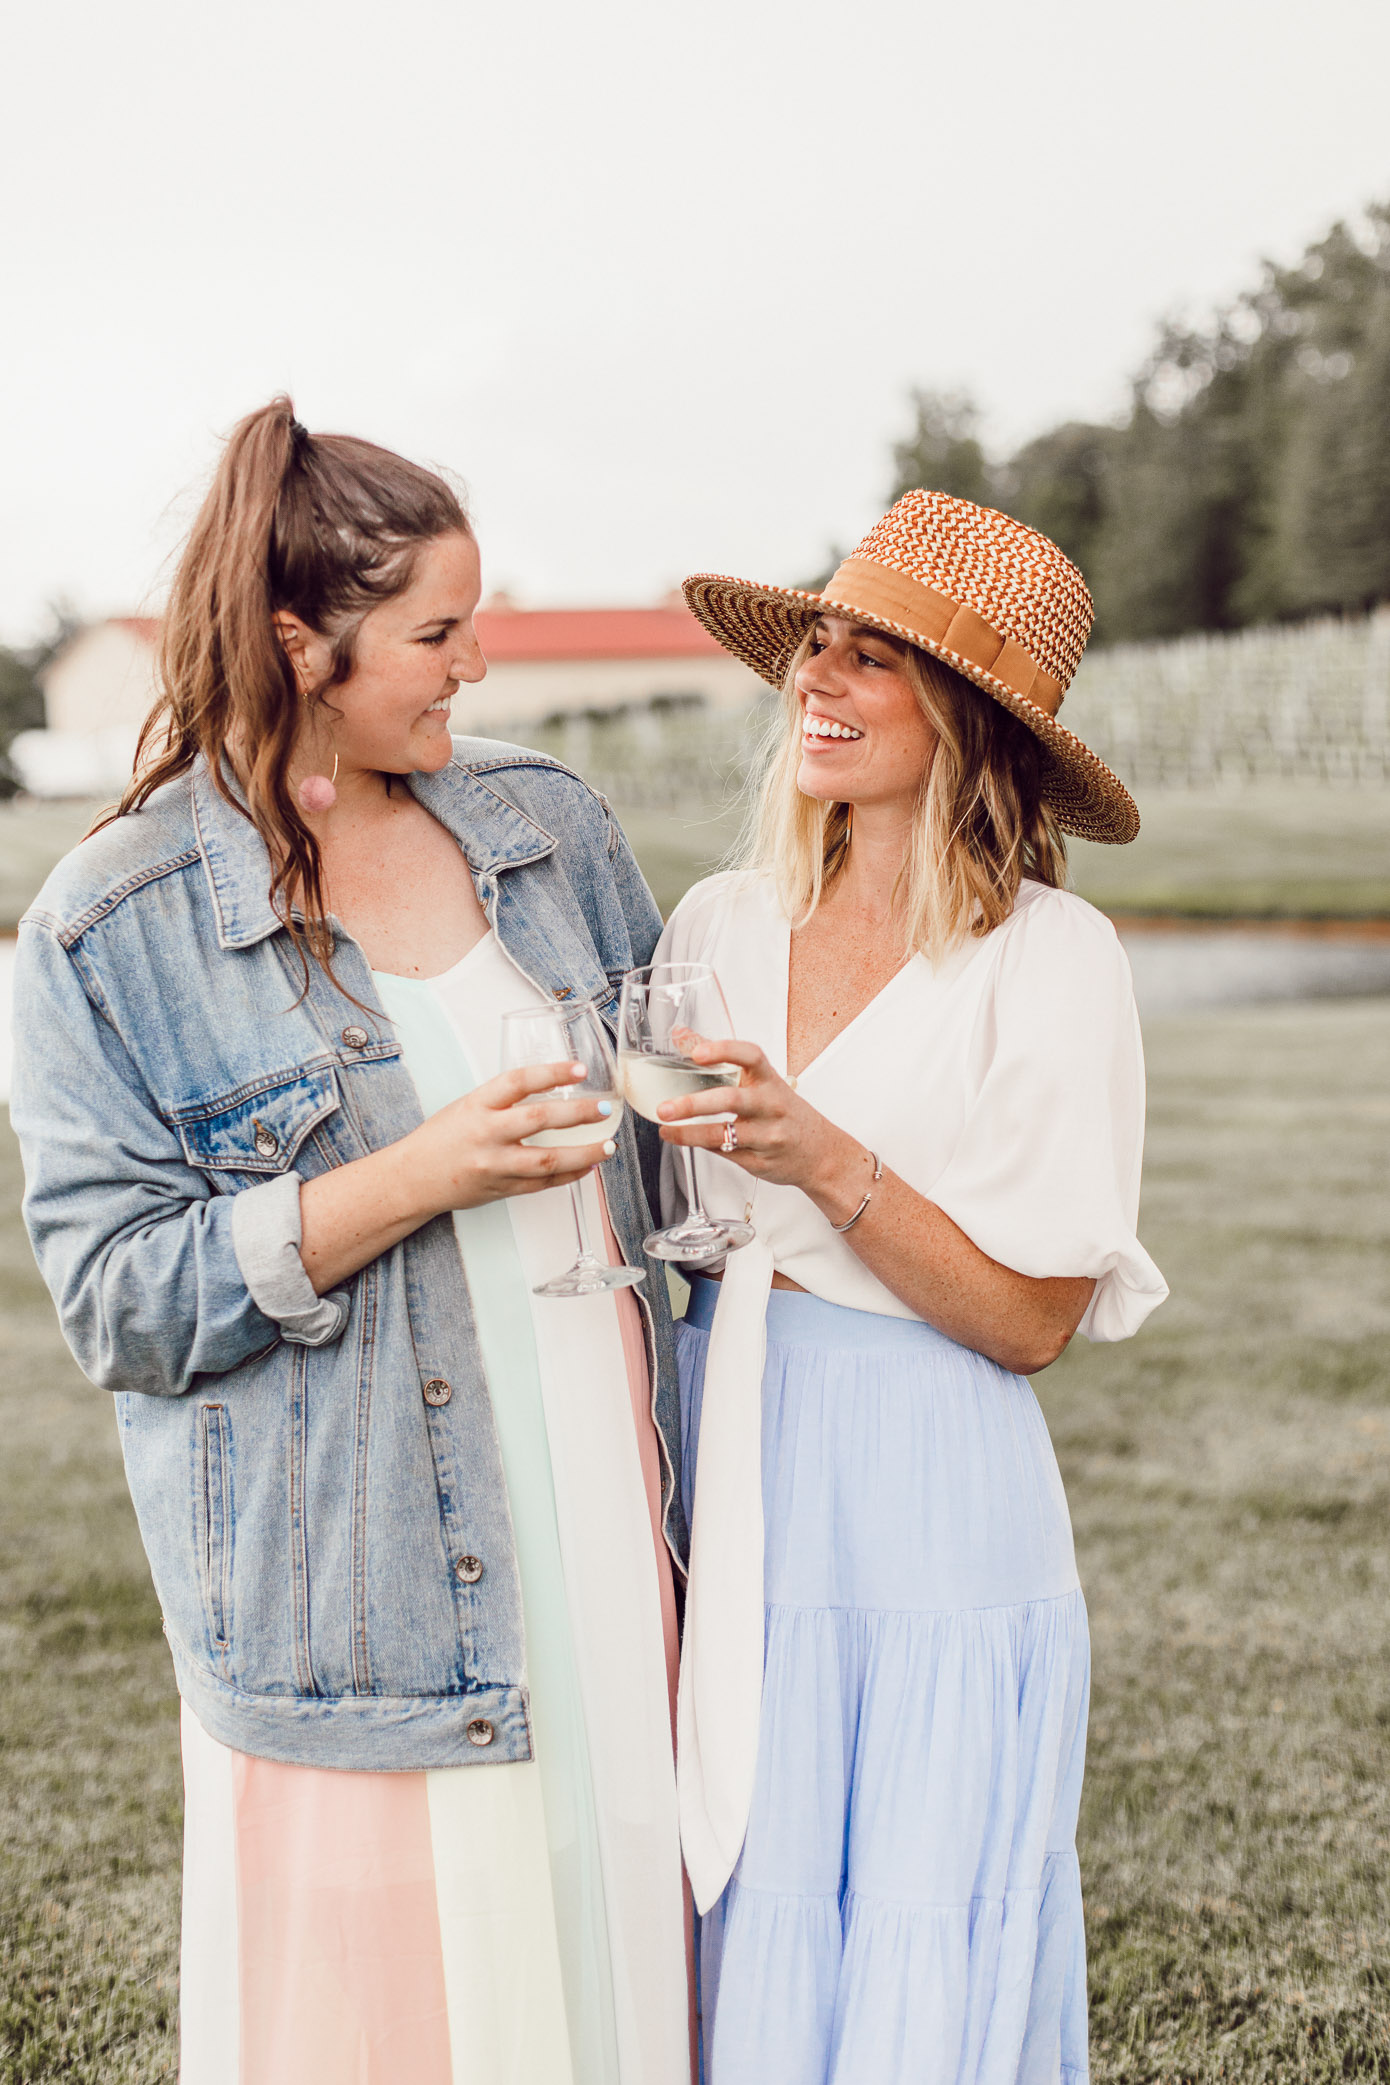 Summer activities to do with your girl friends | What to Wear to a Vineyard | Louella Reese